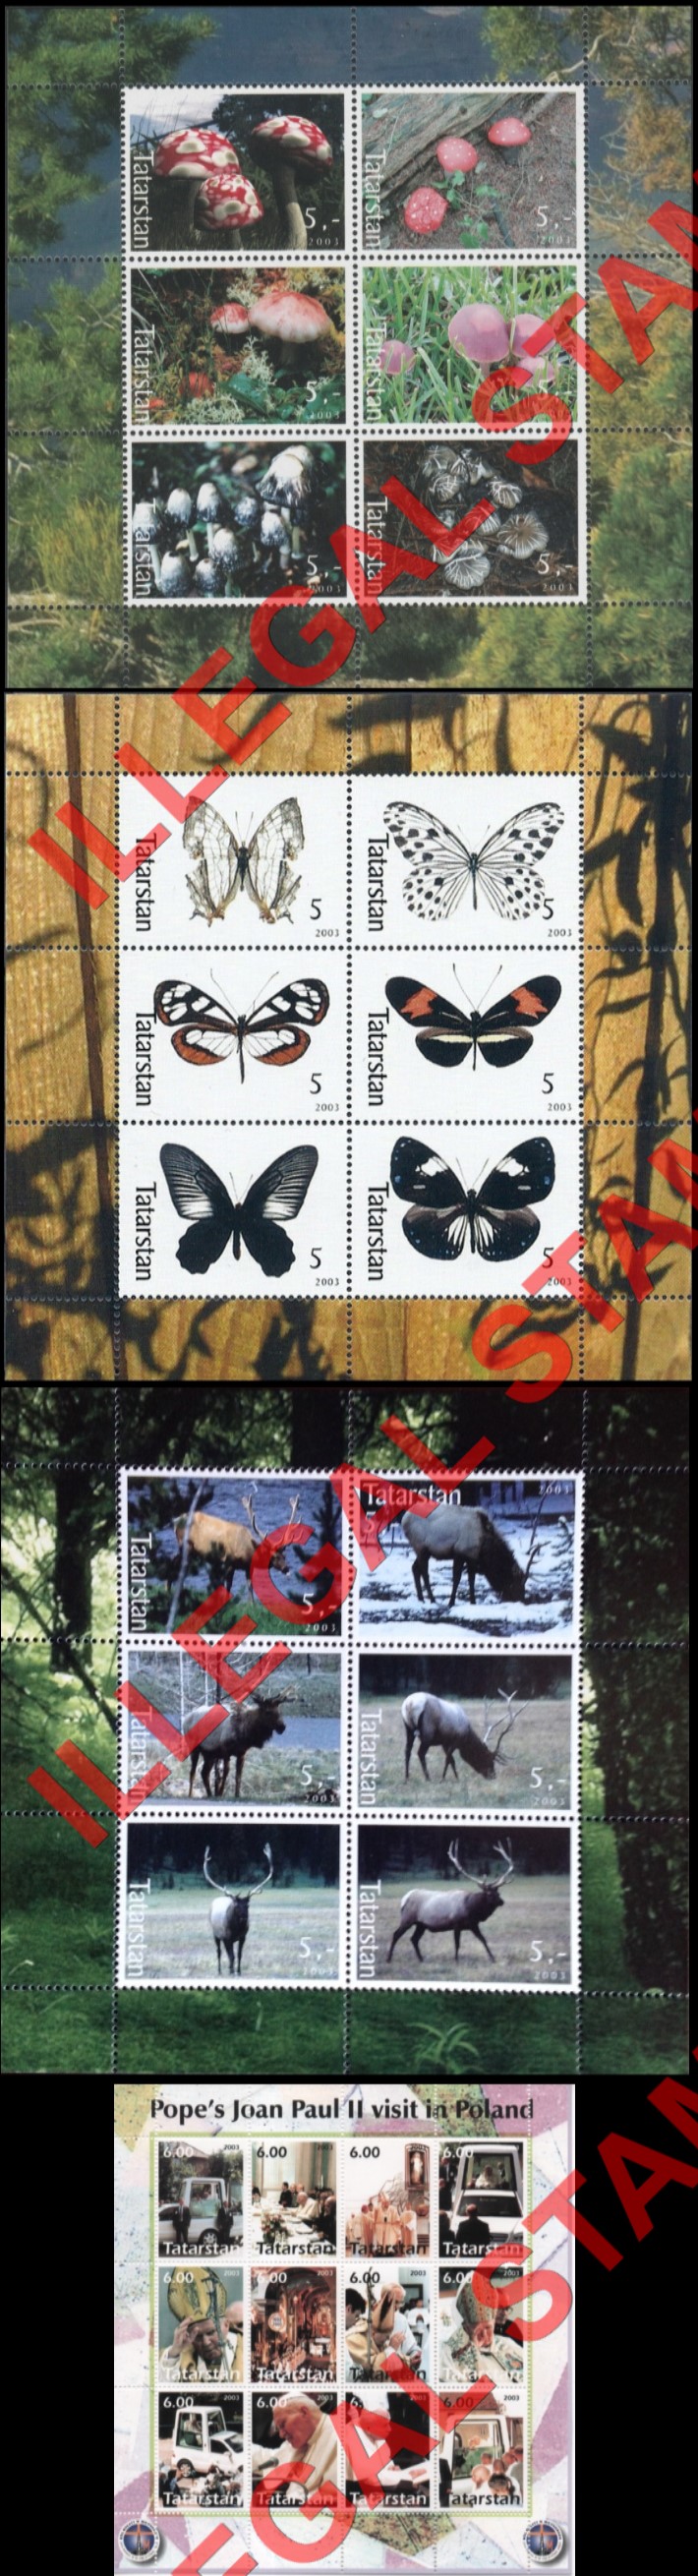 Republic of Tatarstan 2003 Counterfeit Illegal Stamps (Part 1)